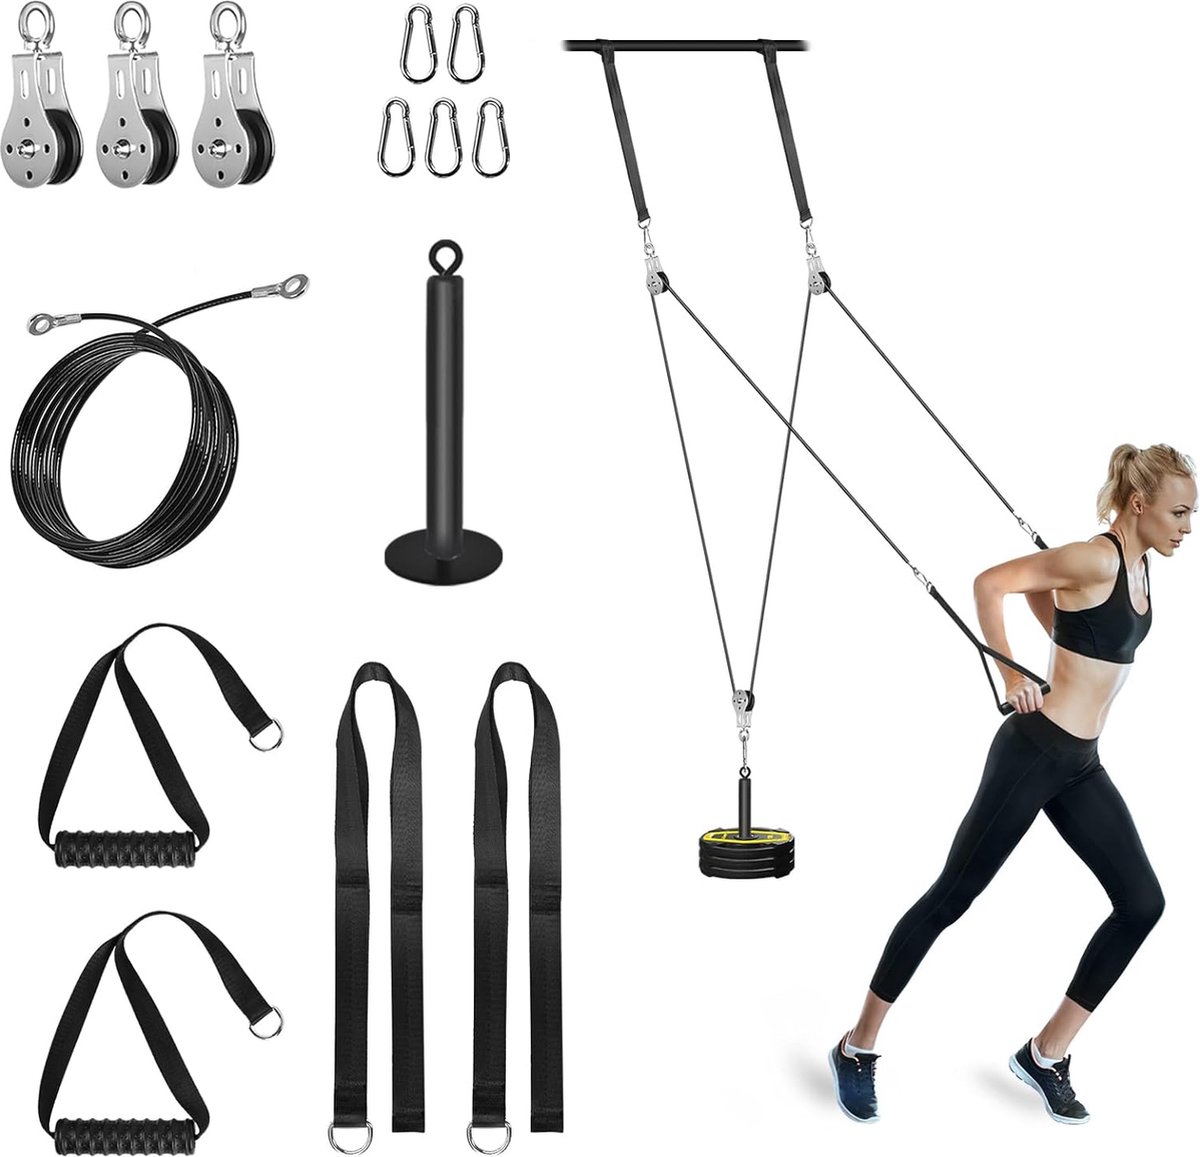 Fitness Kabel Lat Pulley Systeem - DIY Thuis Fitness Machine - Kabel Pulleys voor LAT Pulldowns, Biceps Curl, Triceps Extensions - Spiergroei Workout